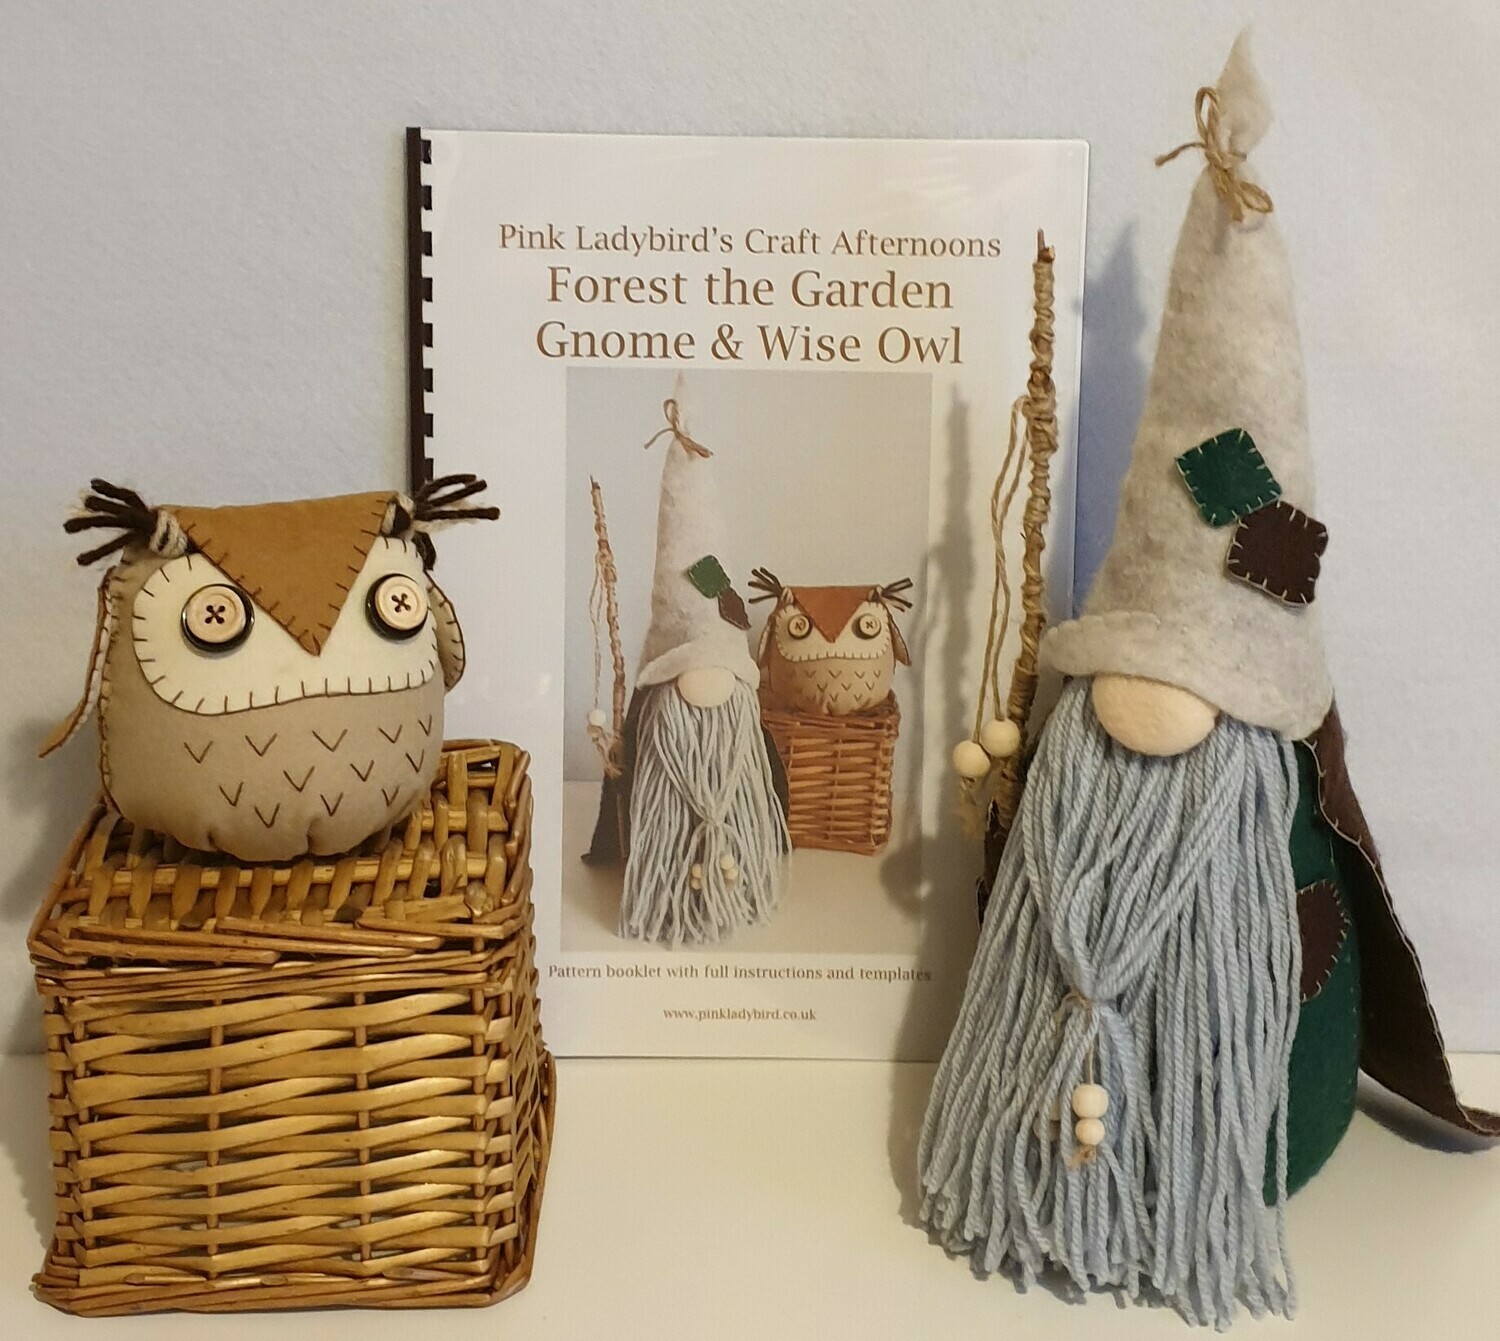 Sewing Pattern Booklet. Nordic Forest Gnome & Wise Owl